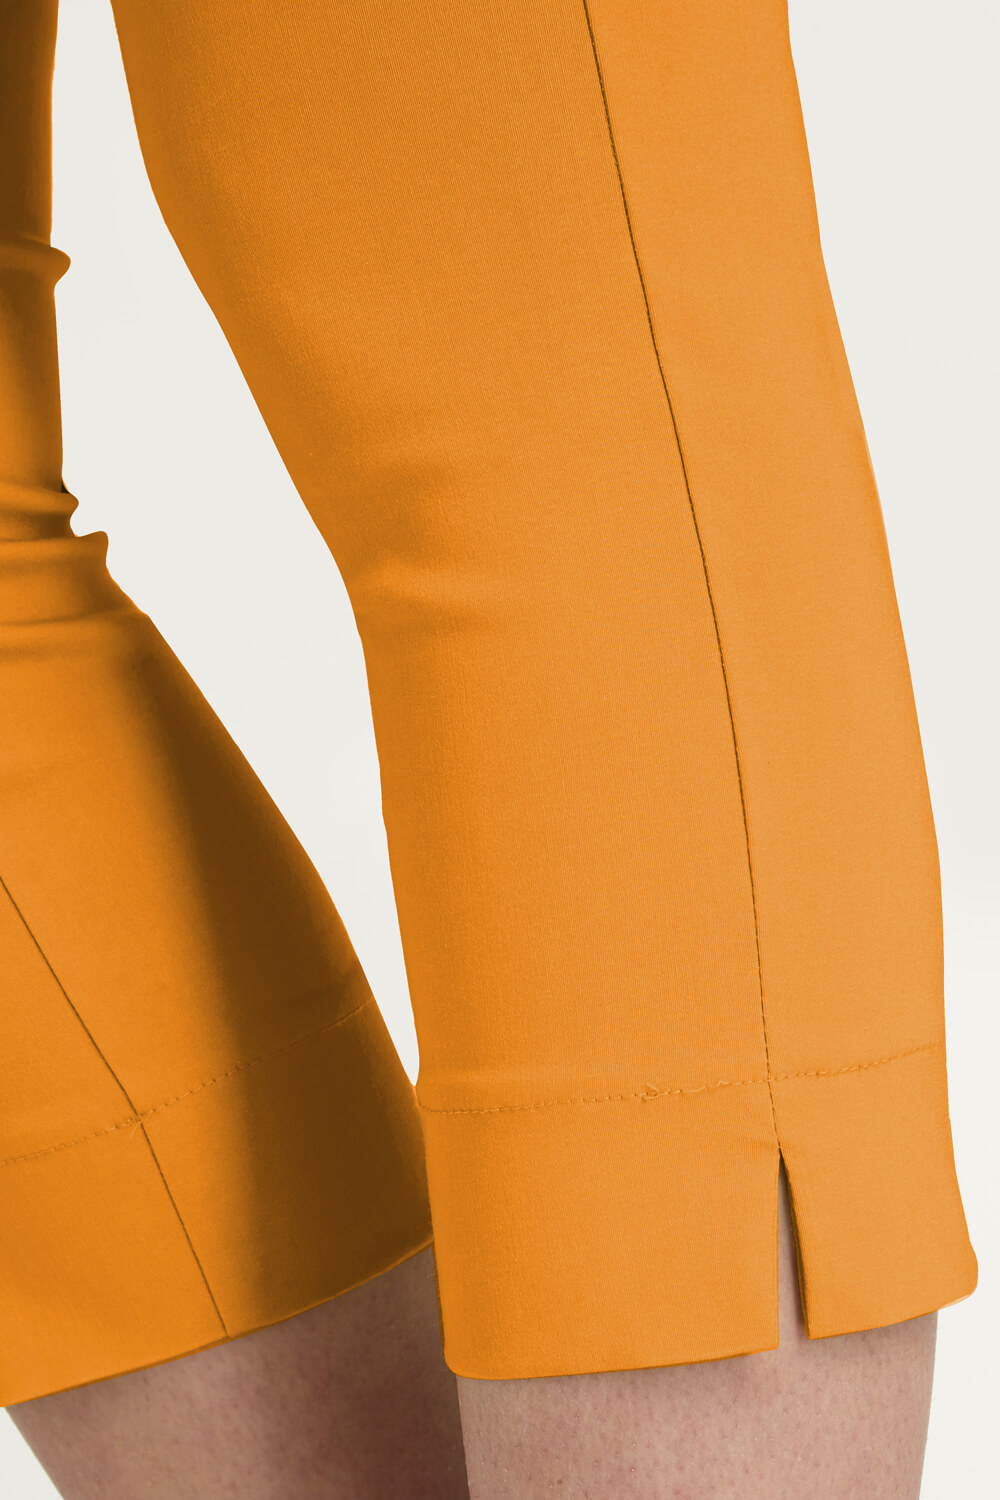 ORANGE Cropped Stretch Trouser, Image 3 of 7